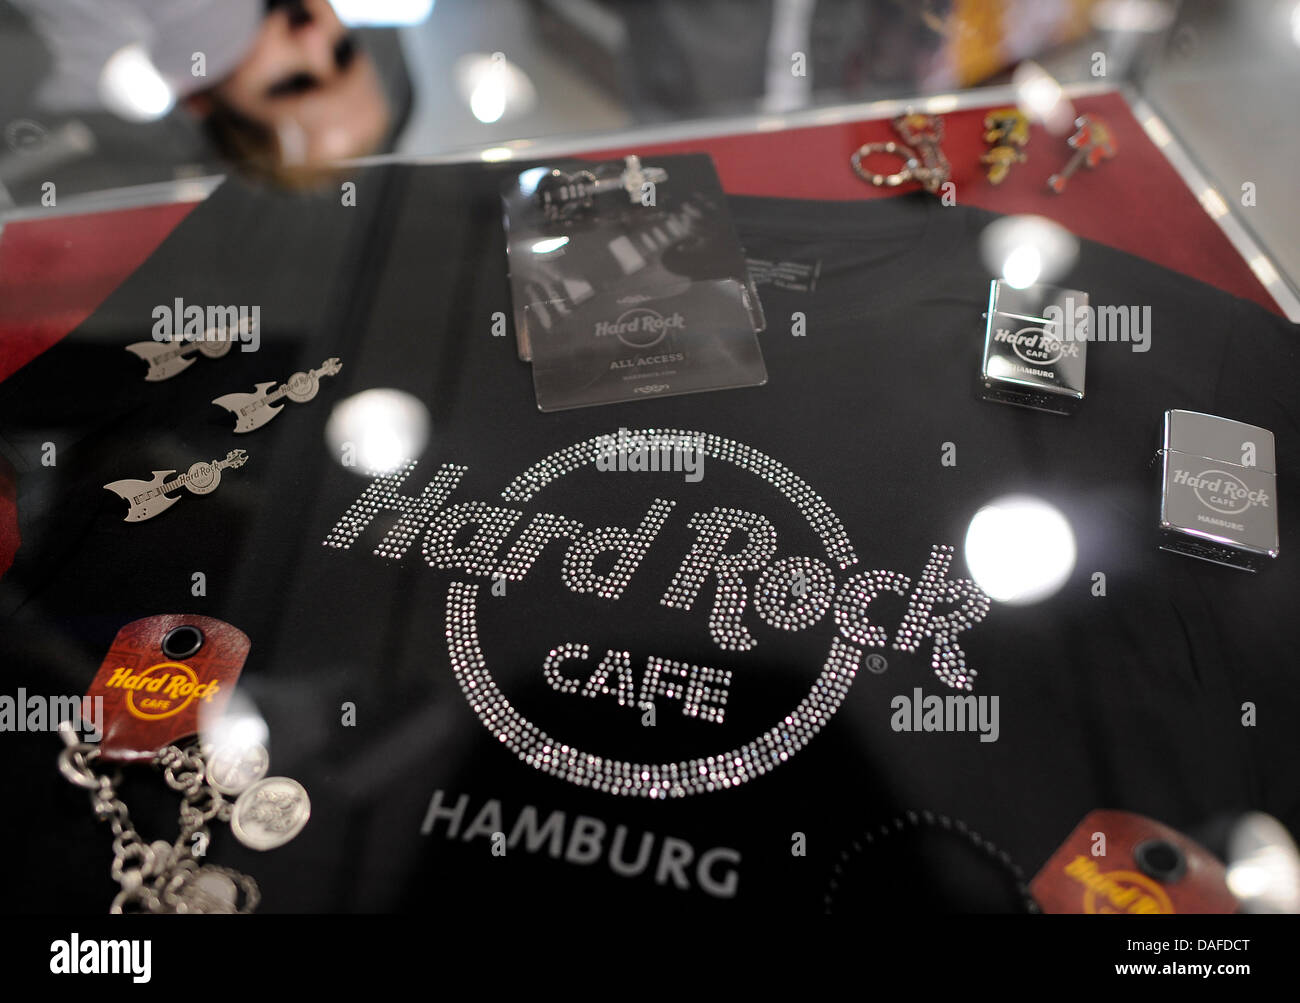 Memorabilia with the logo of the Hard Rock Cafe are on display in the window of the Hard Rock Cafe's shop in Hamburg, Germany, 21 February 2011. The Hamburg branch has not opened yet, but the shop is already open. Photo: FABIAN BIMMER Stock Photo